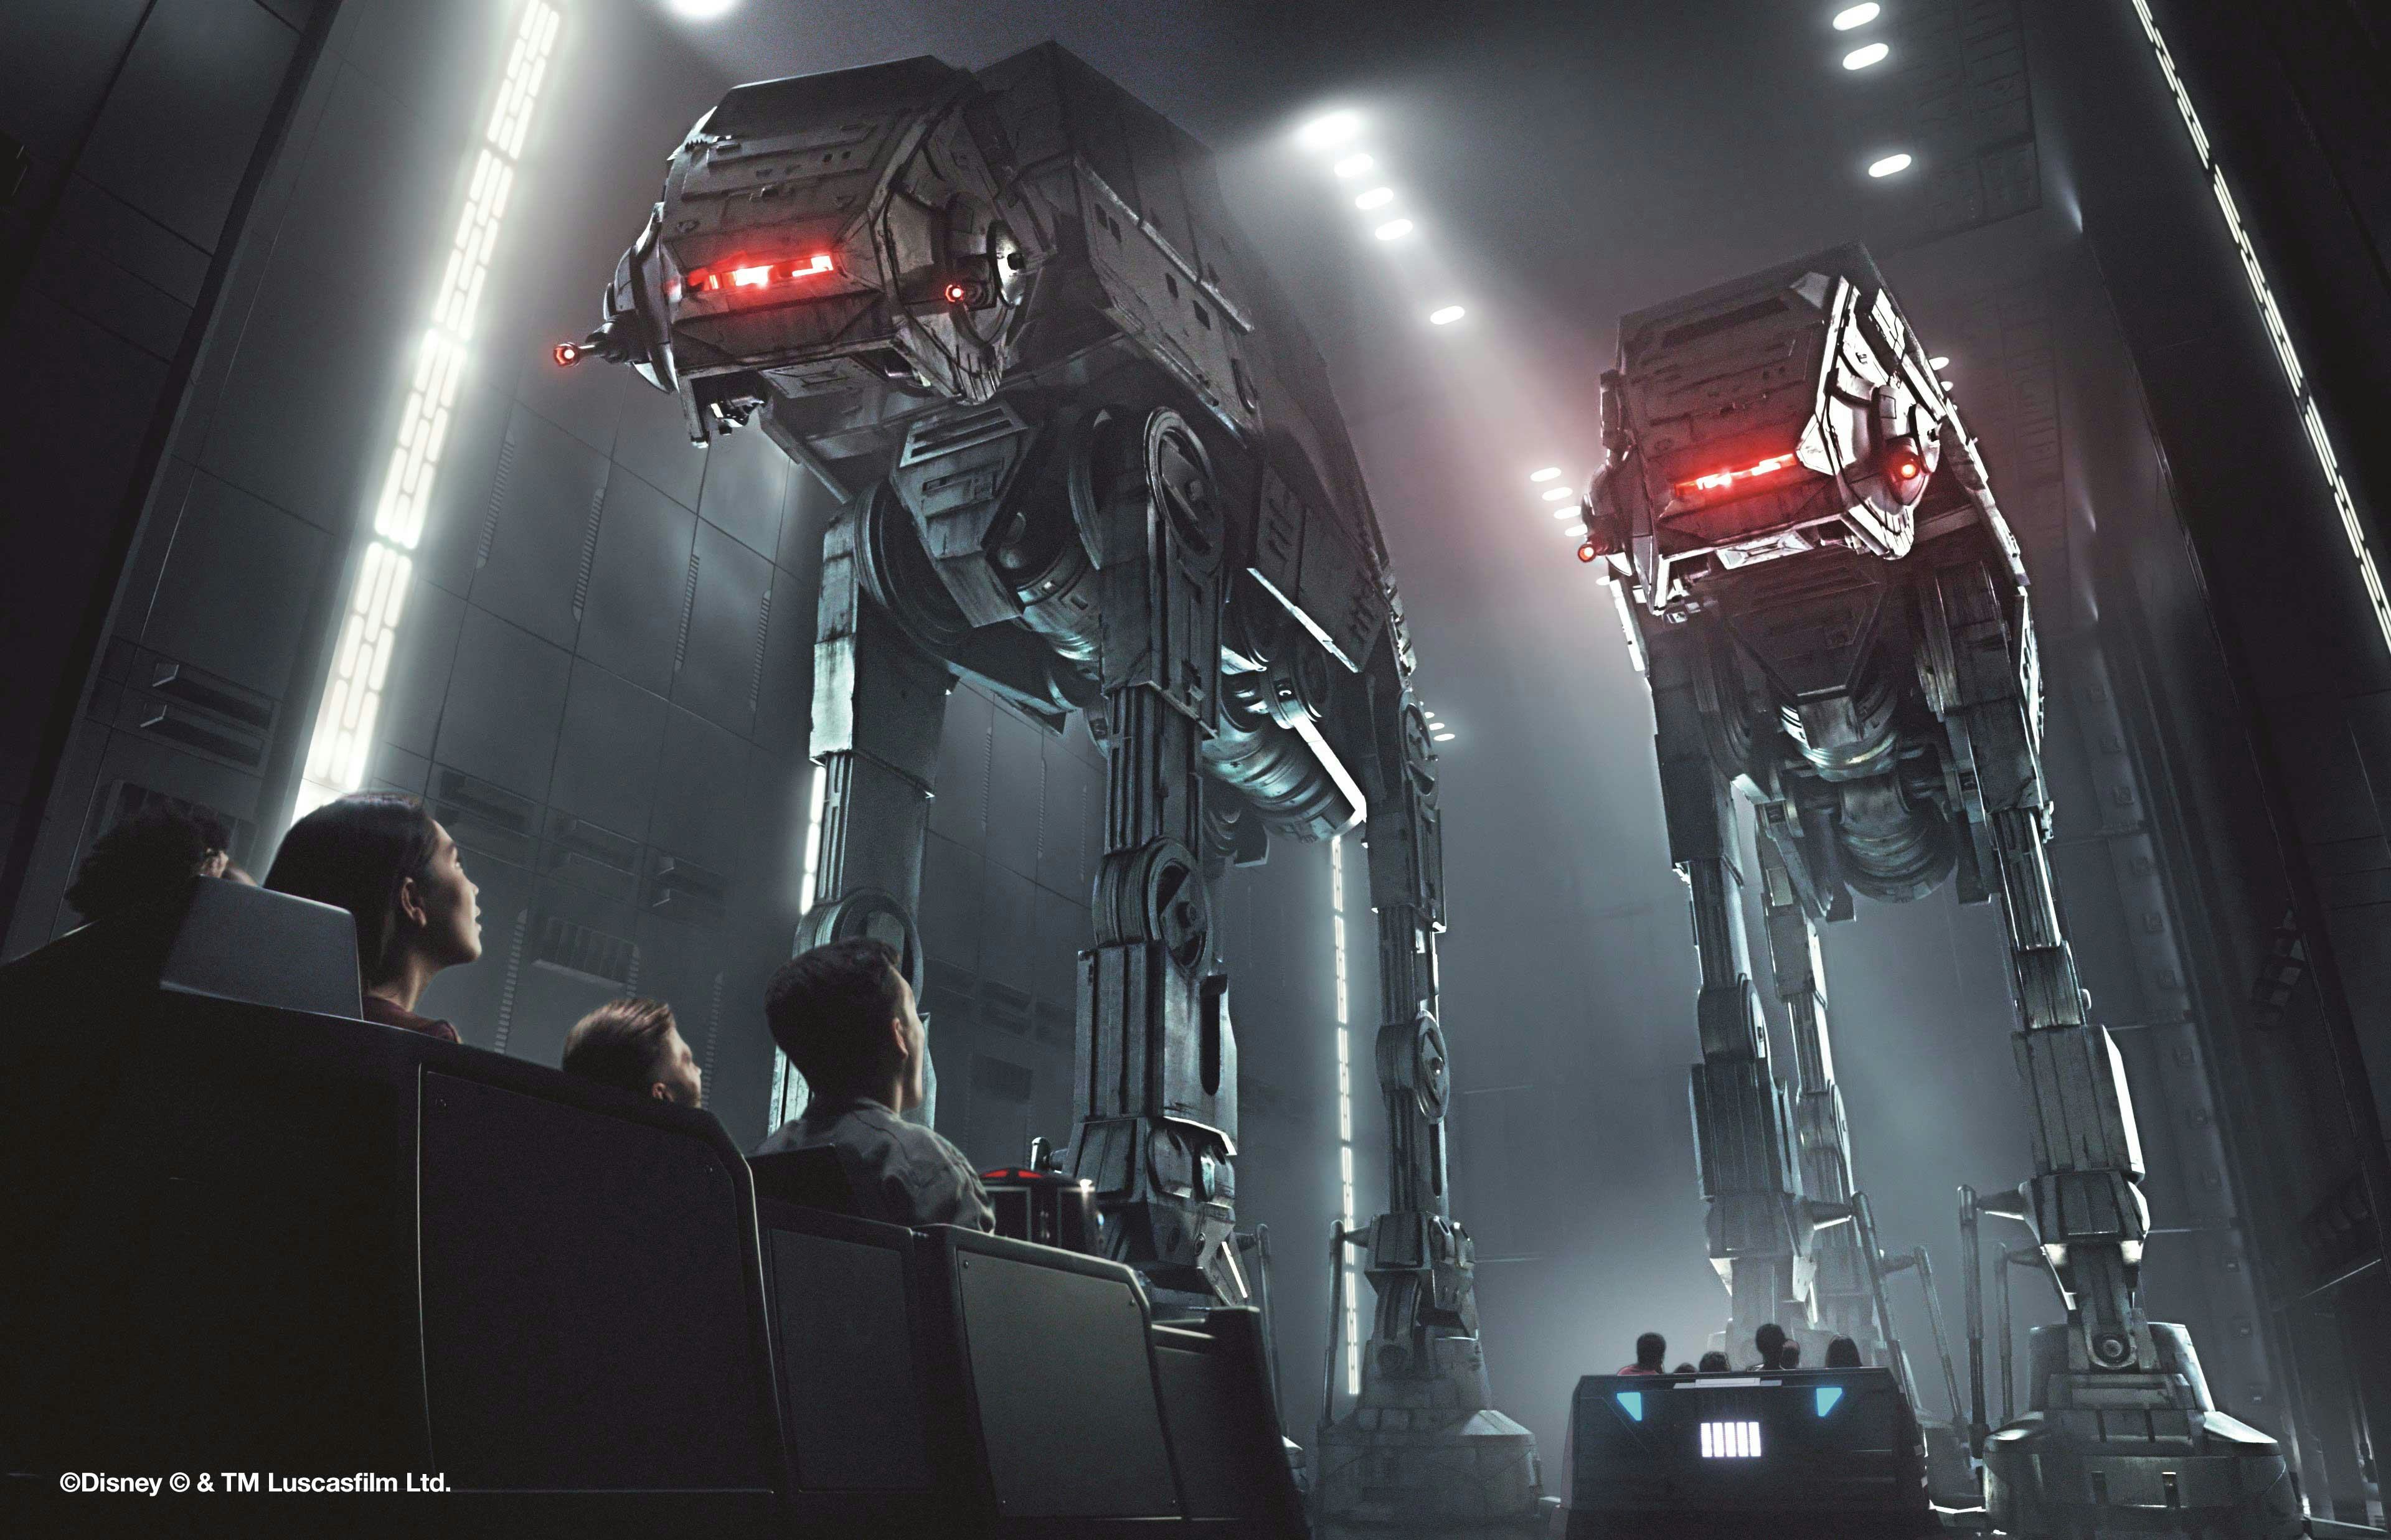 Star Wars: Galaxy's Edge - Star Wars: Rise of the Resistance Rendering